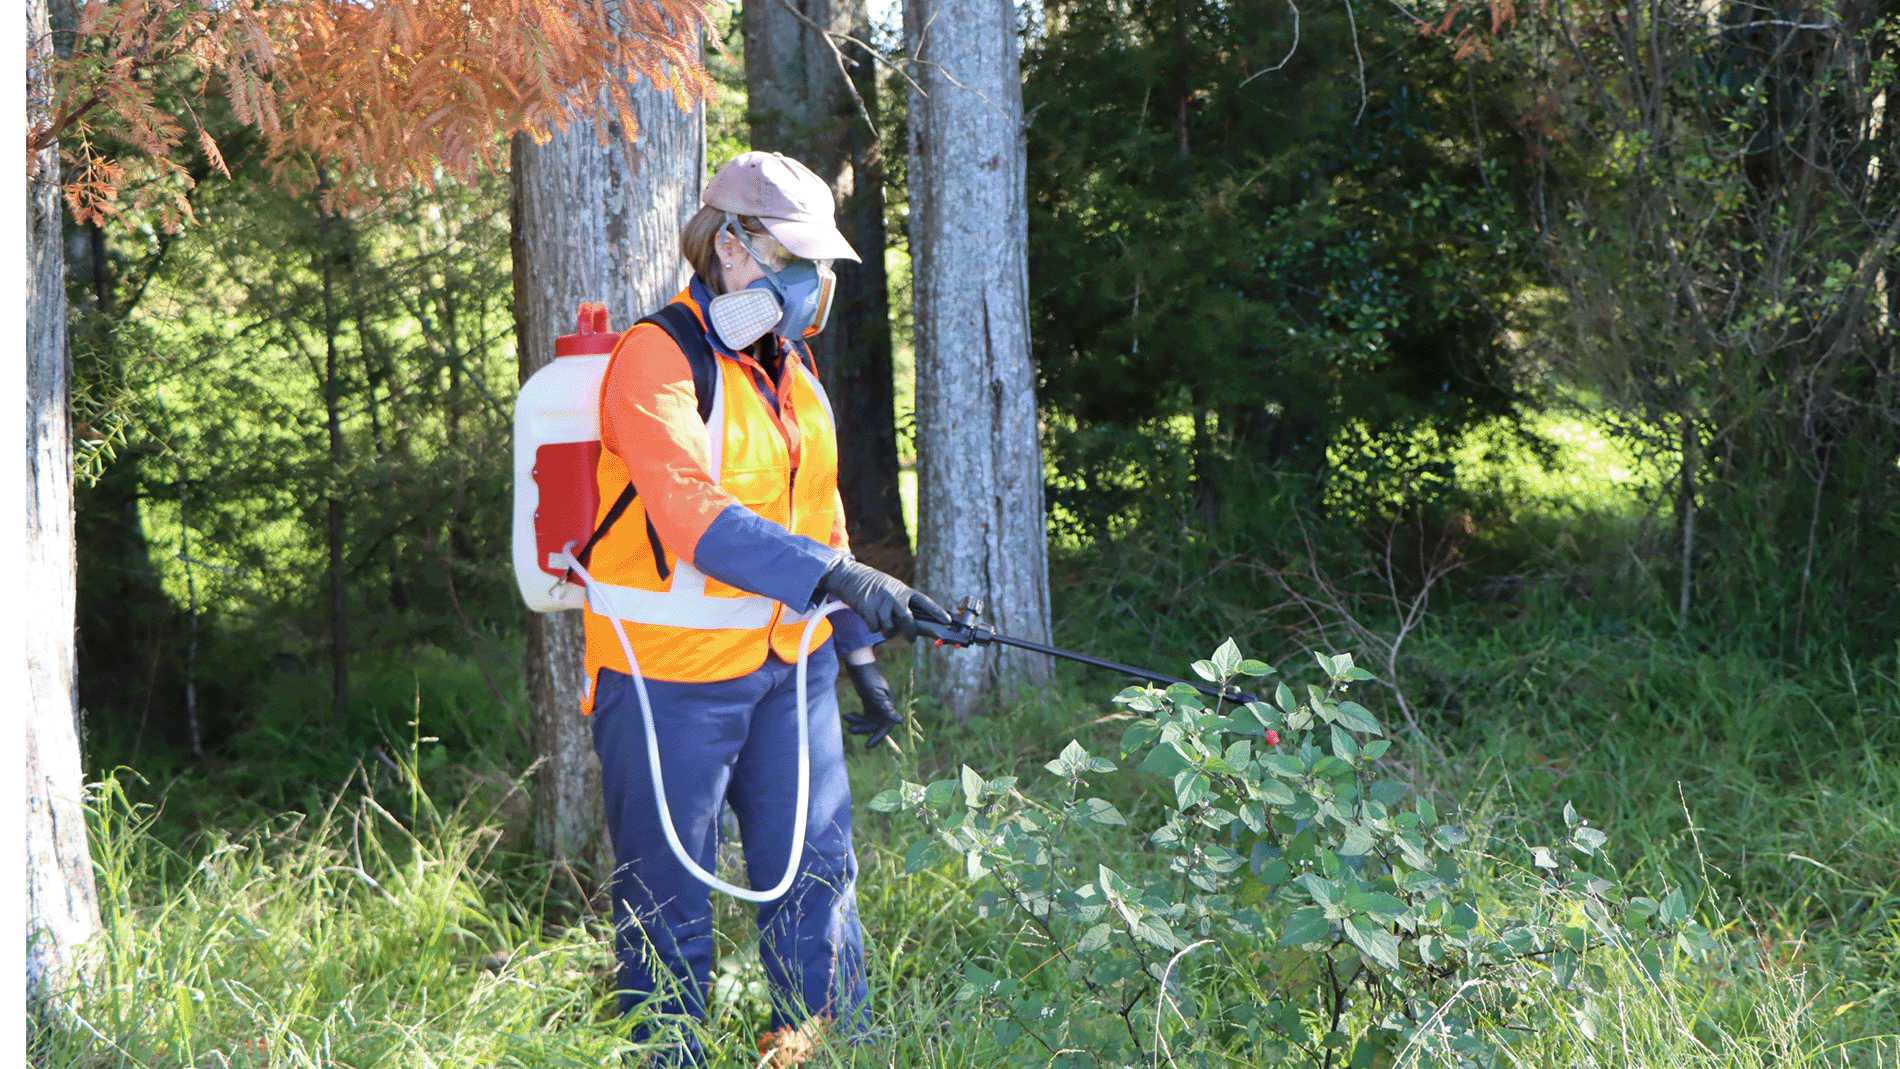 Image - Person in protective wear spraying weeds 